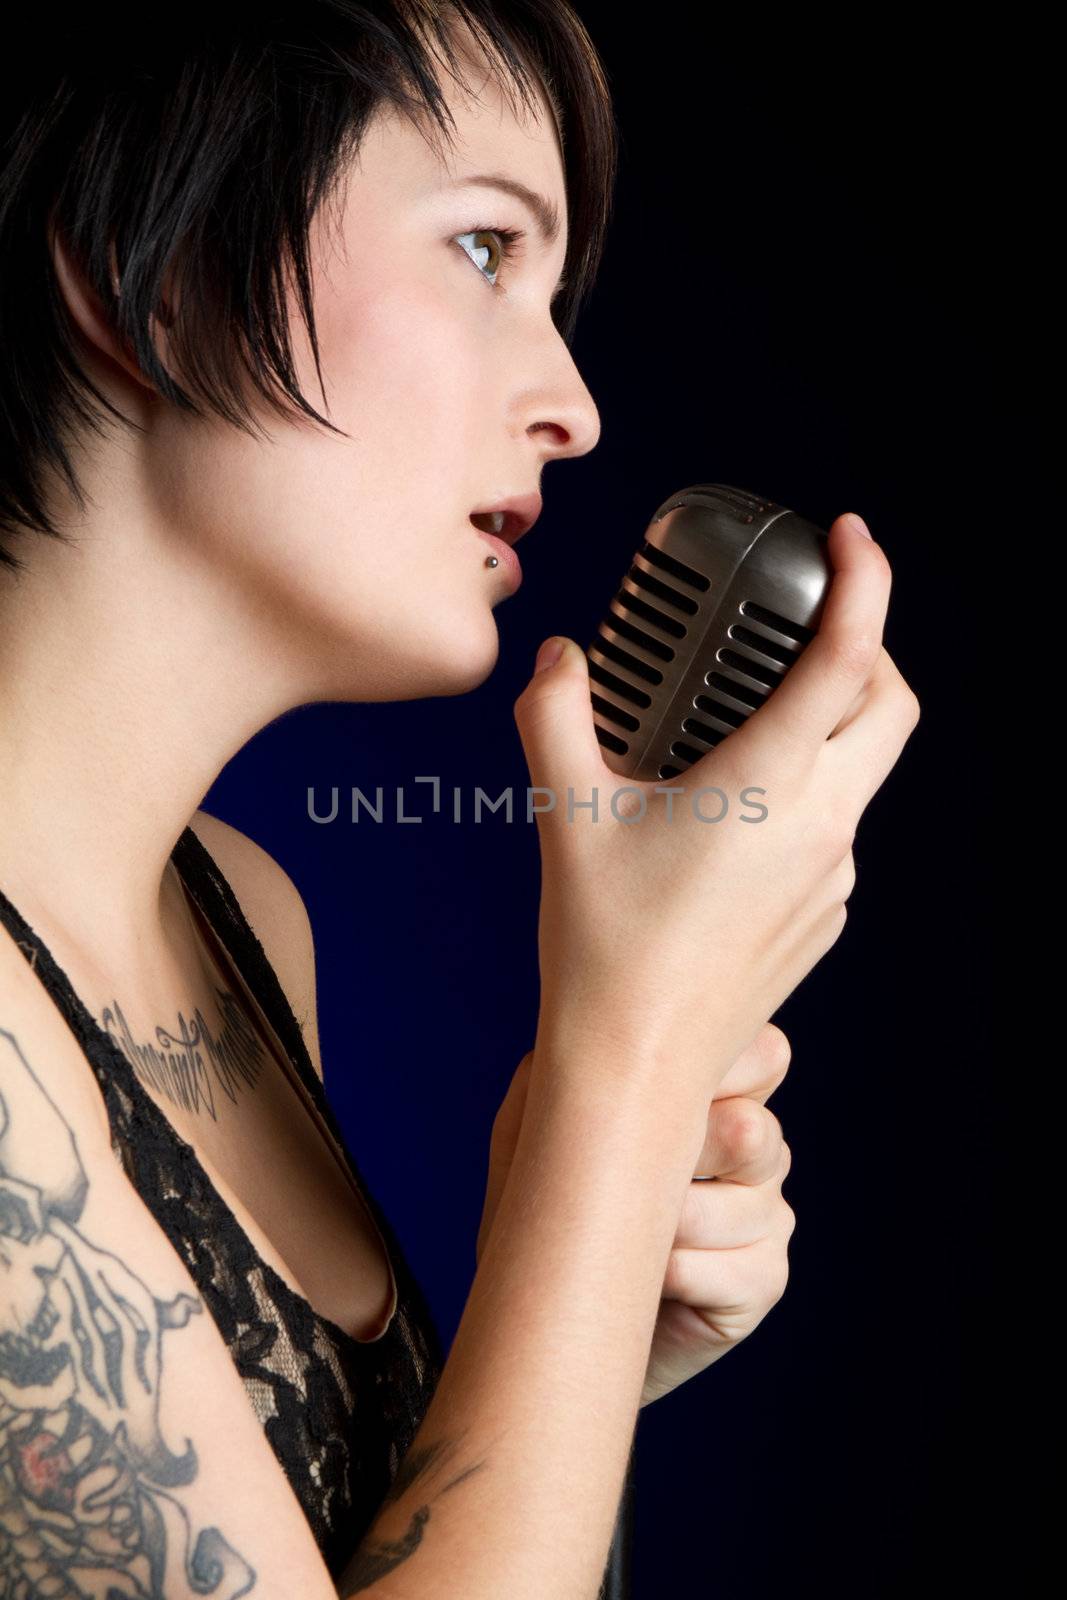 Pretty girl singing into microphone